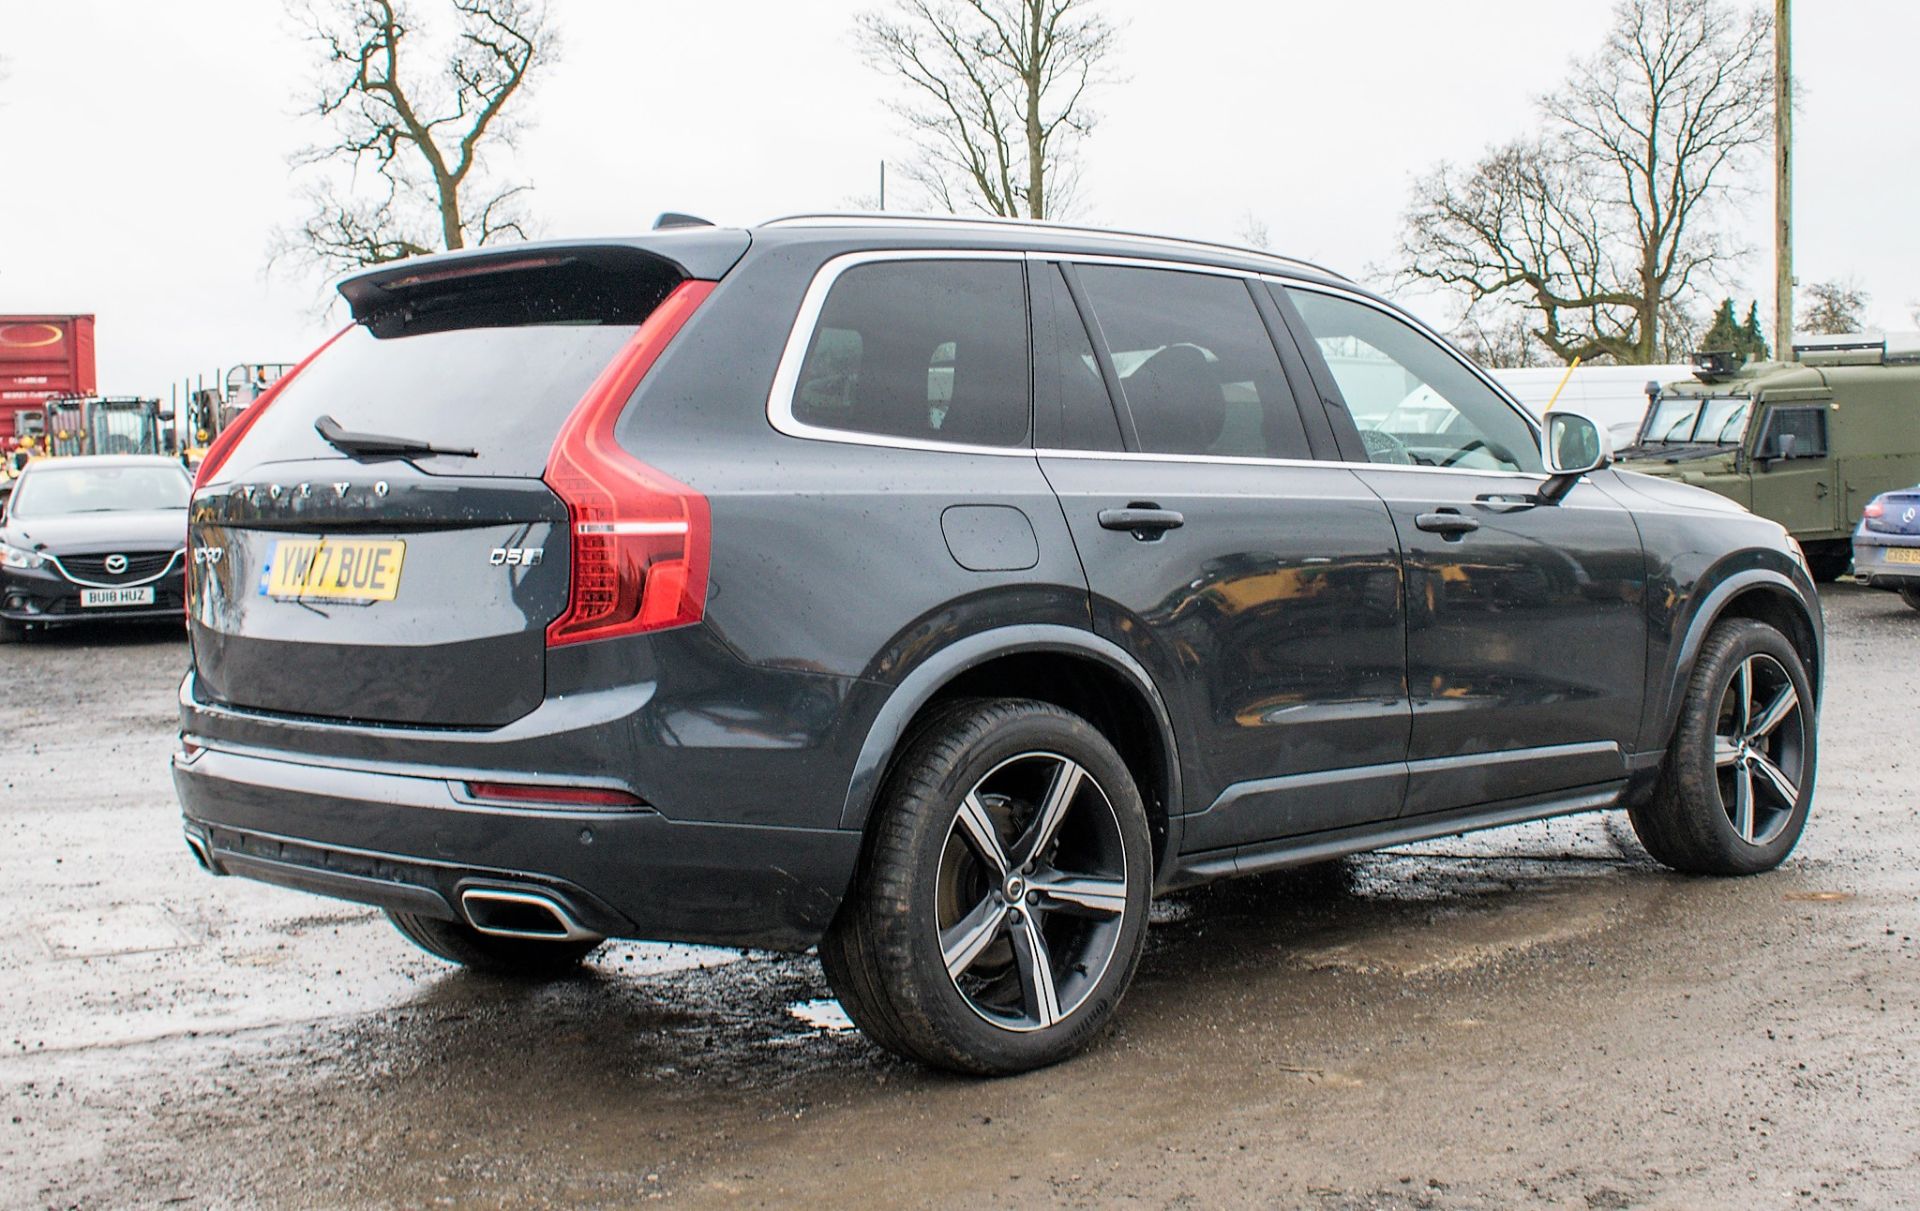 Volvo XC90 R-Design Pro D5 Auto 4 wheel drive 5 door sports utility vehicle Registration Number: - Image 3 of 14